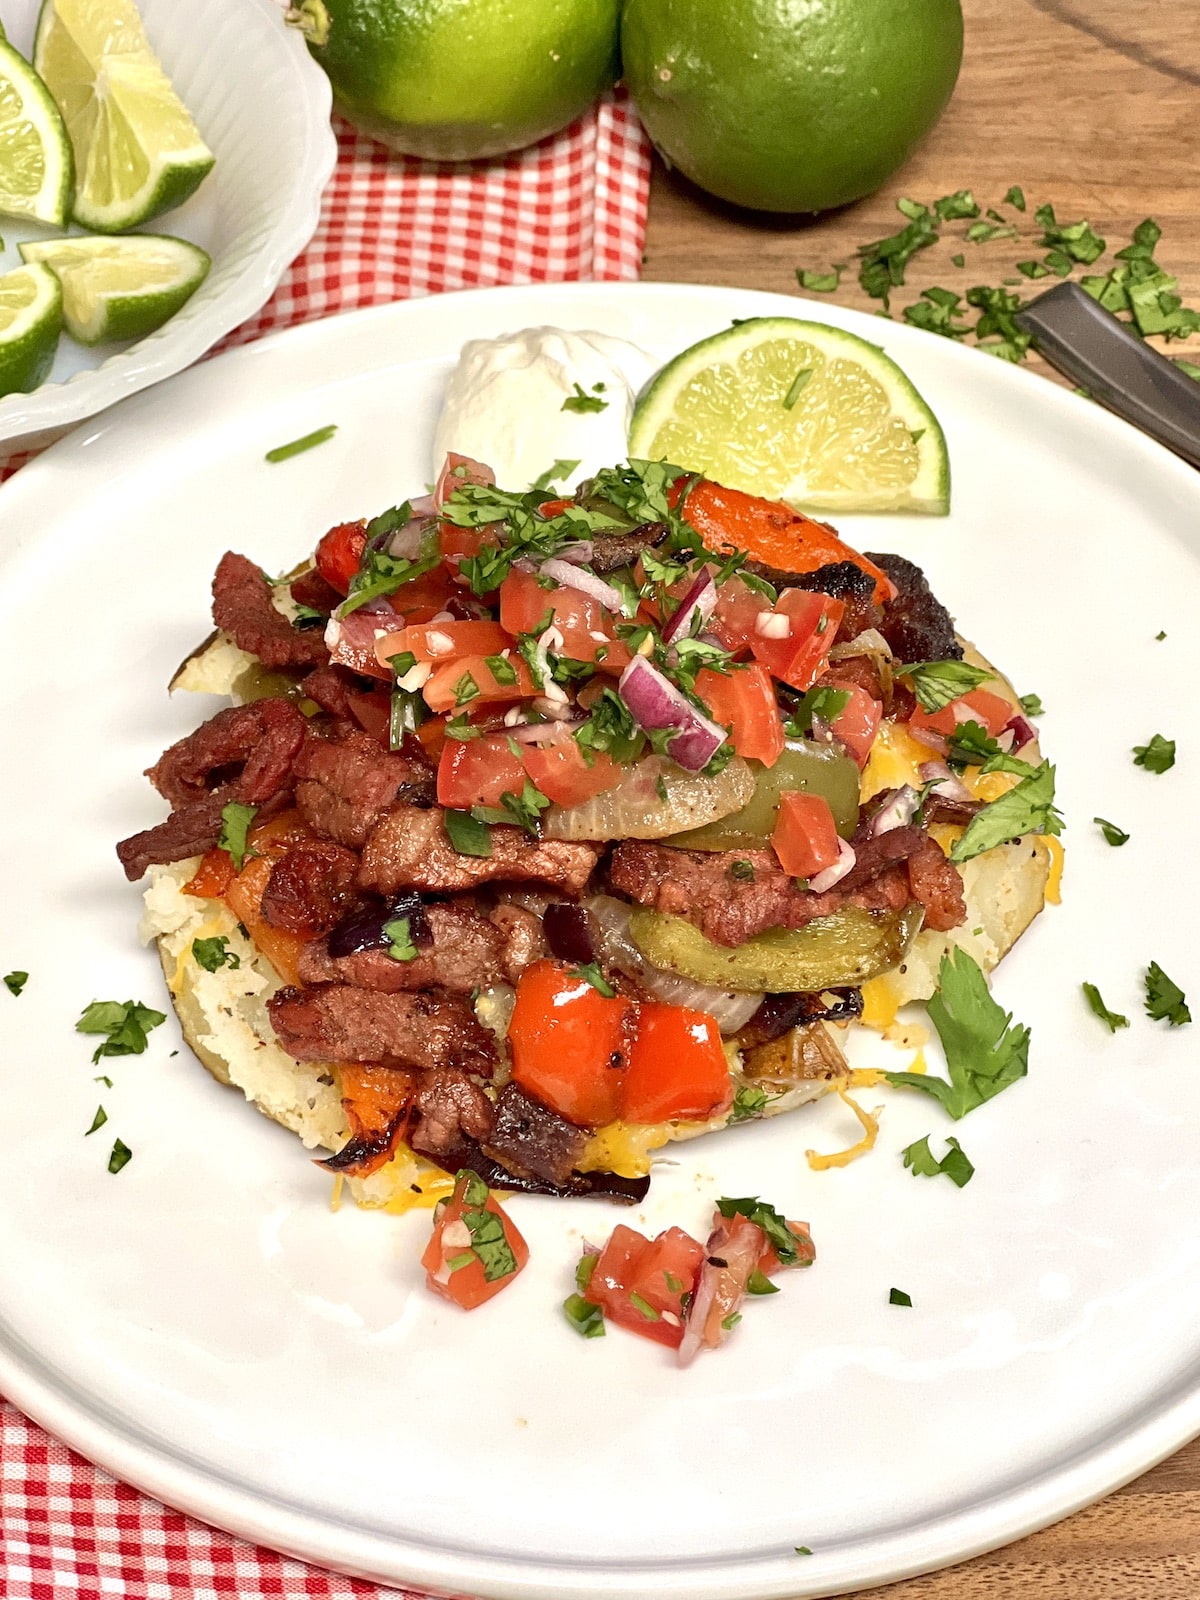 Loaded baked potato on a plate topped with beef fajita mixture.